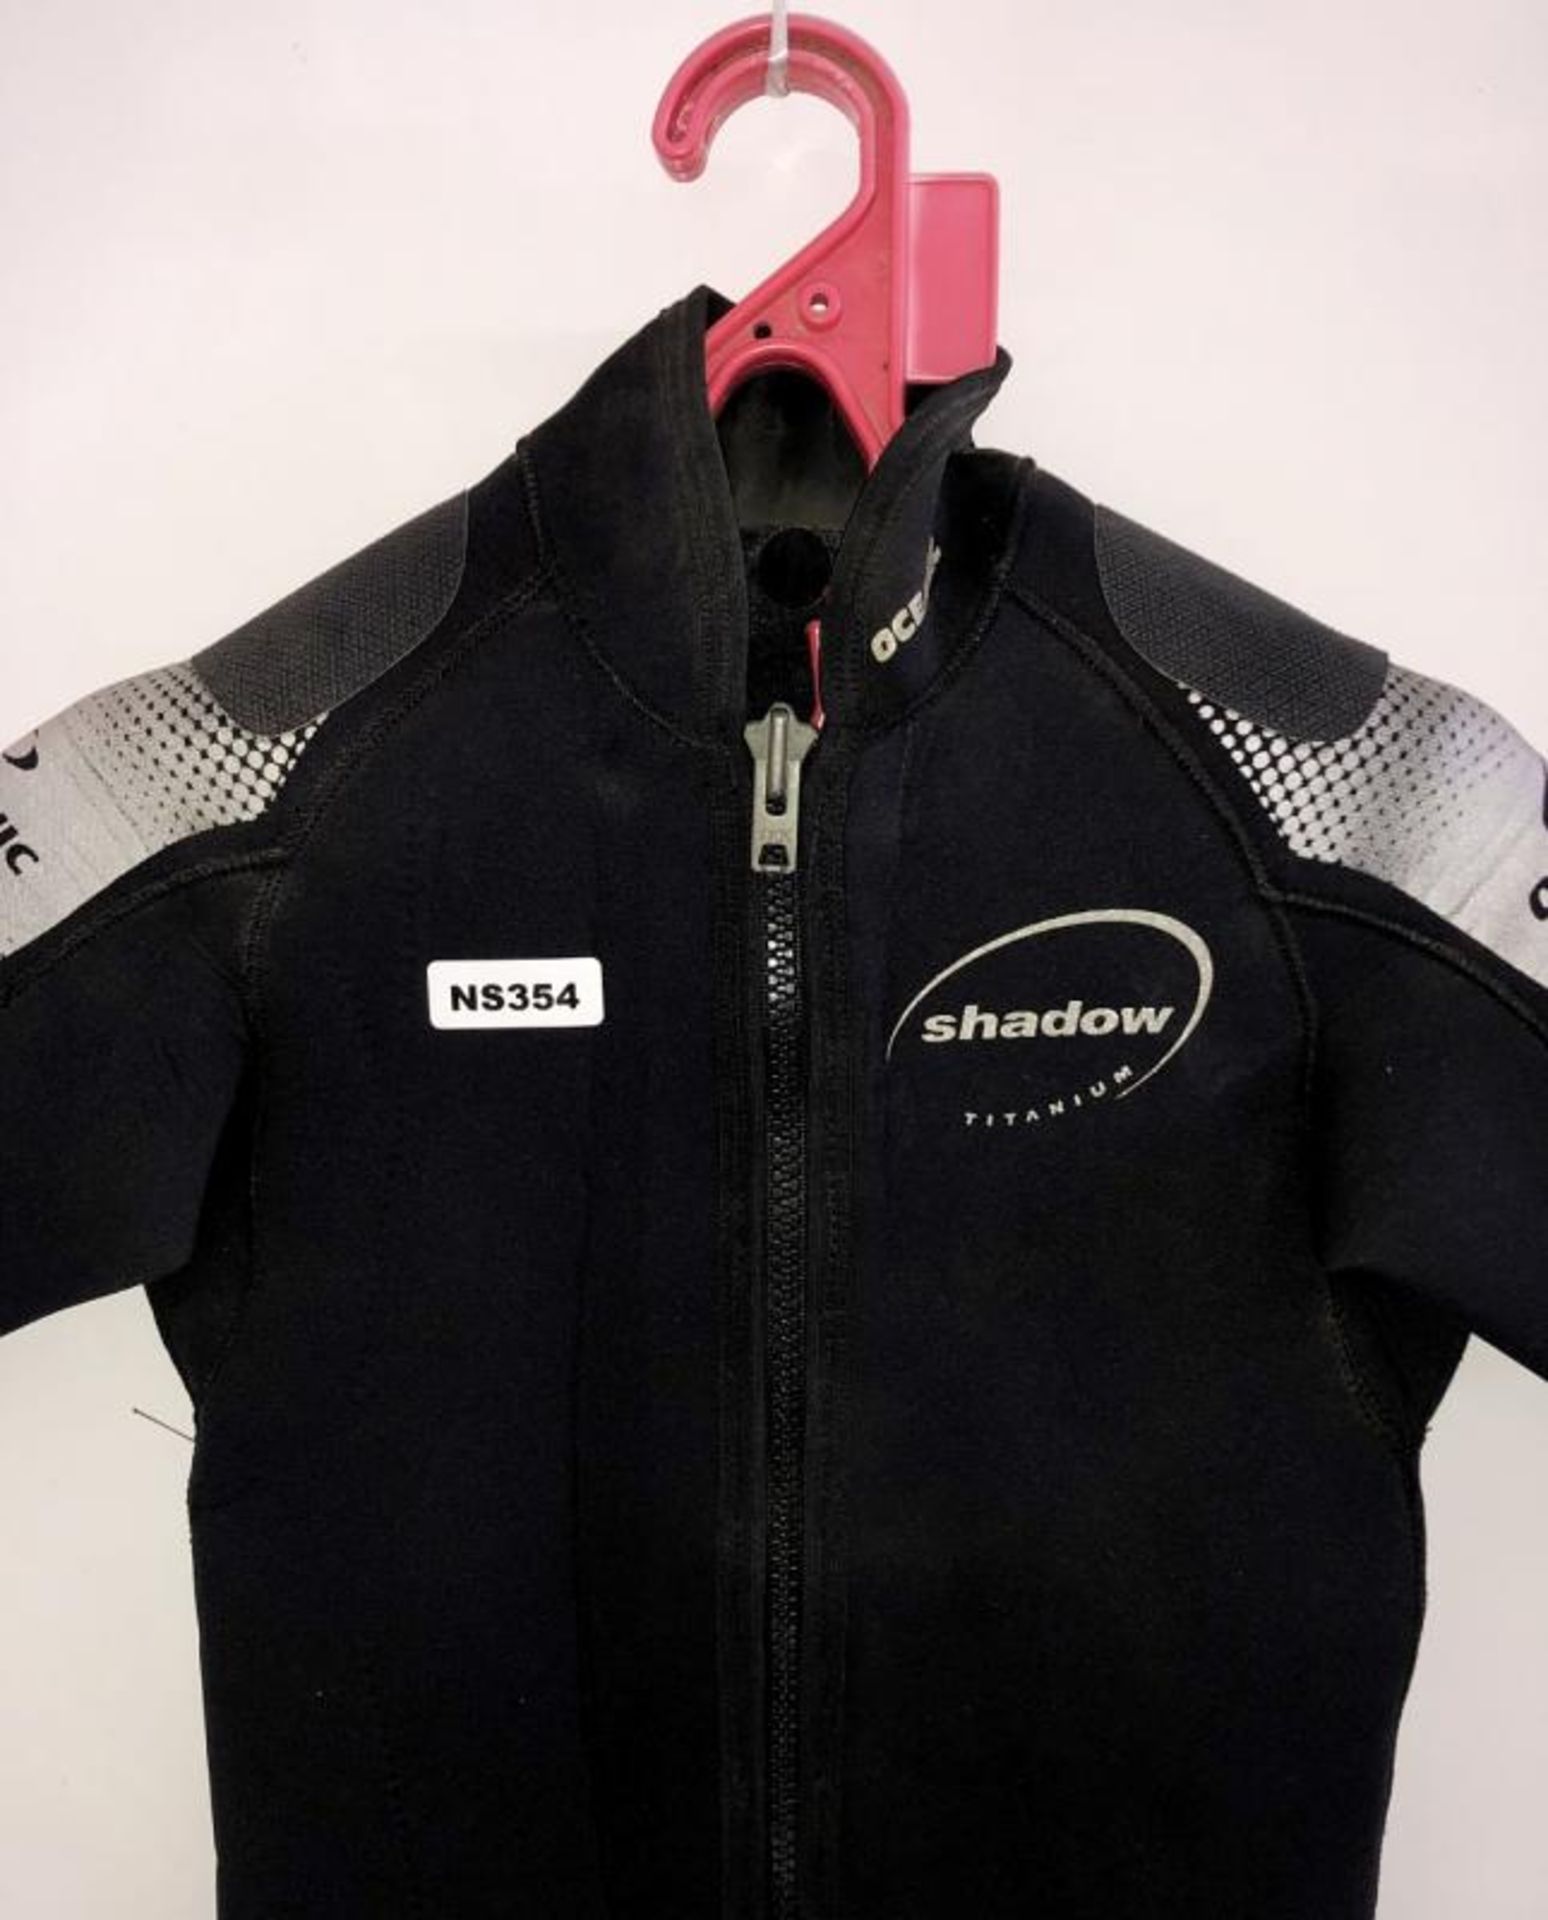 1 x Small Oceanic Shadow Titanium Shortie Wetsuit In Black - Ref: NS354 - CL349 - Location: Altrinch - Image 3 of 5